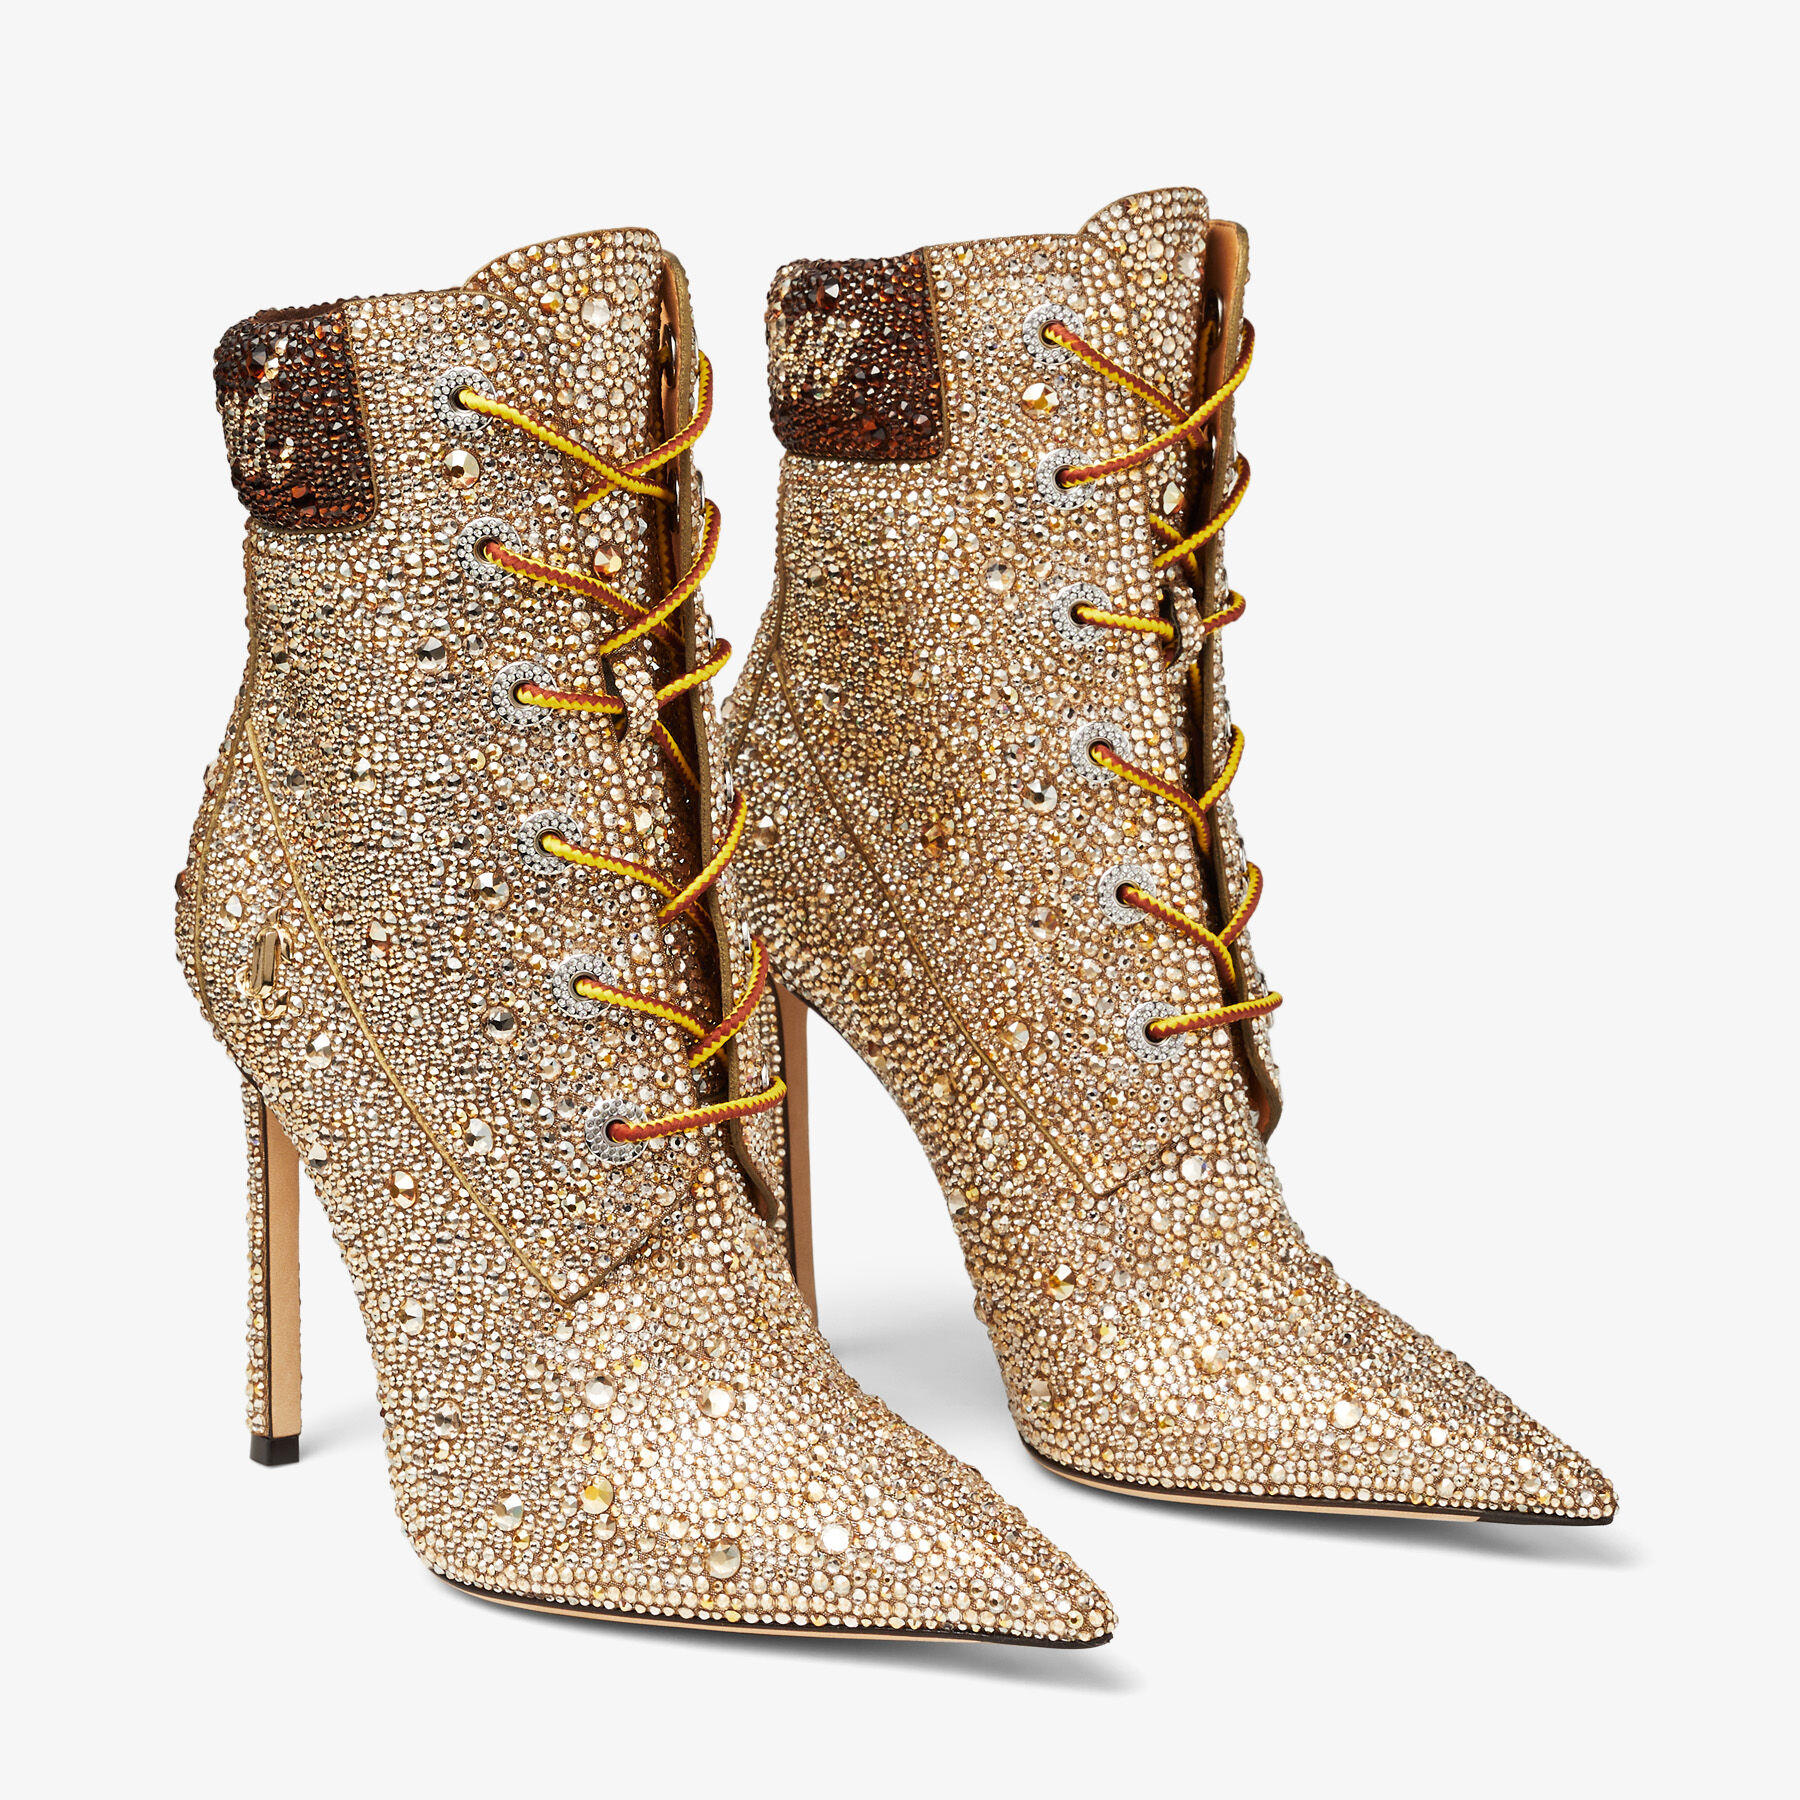 Gold Timberland Shimmer Suede Ankle Boots | JIMMY CHOO US X TIMBERLAND 6 CRYSTAL BOOT | JIMMY CHOO US x Timberland Collection | JIMMY CHOO US